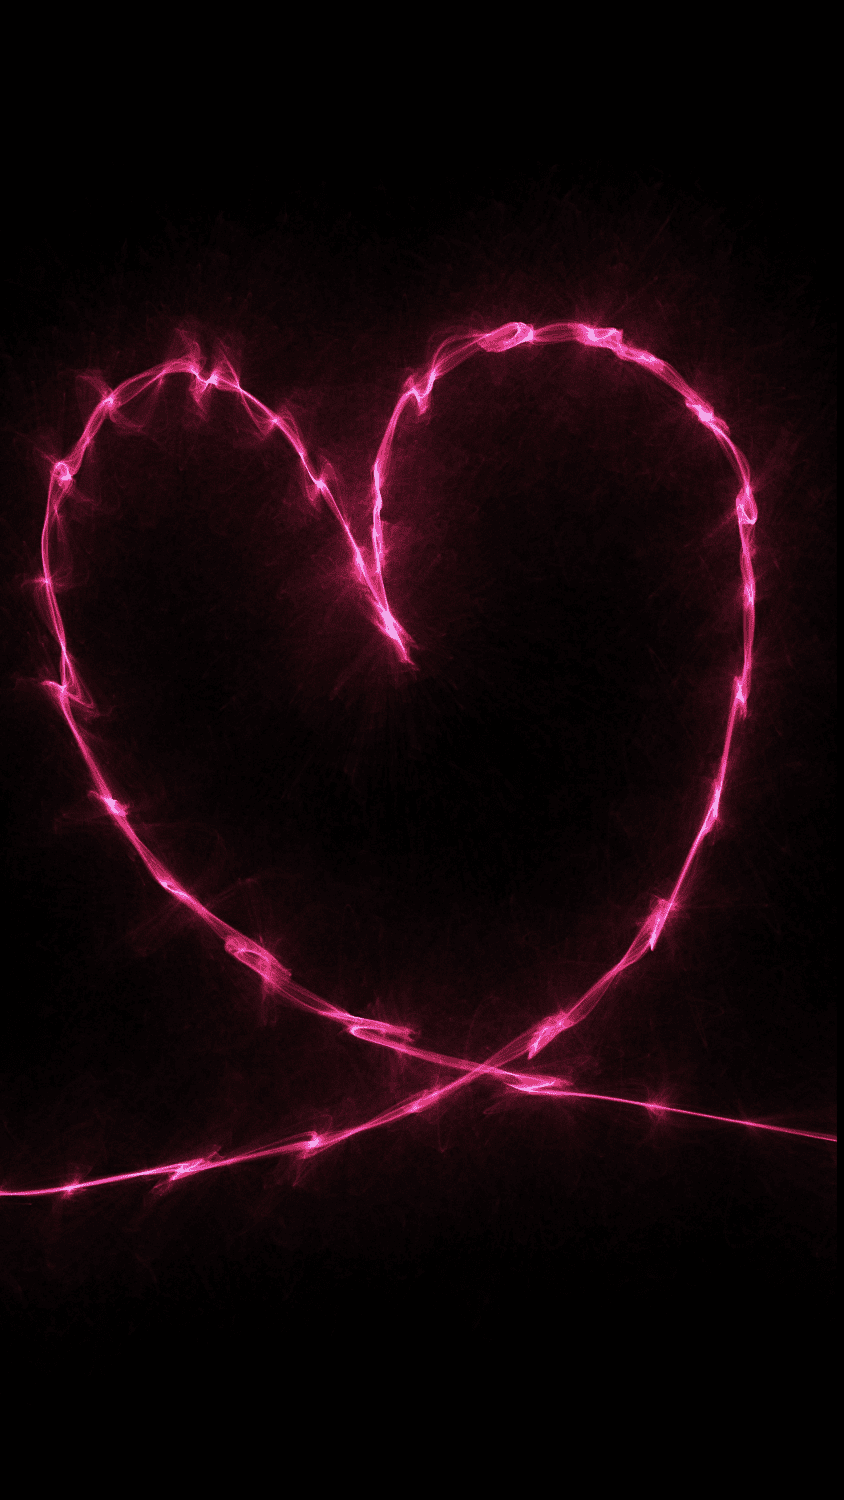 A heart shaped light on the dark background - Neon pink